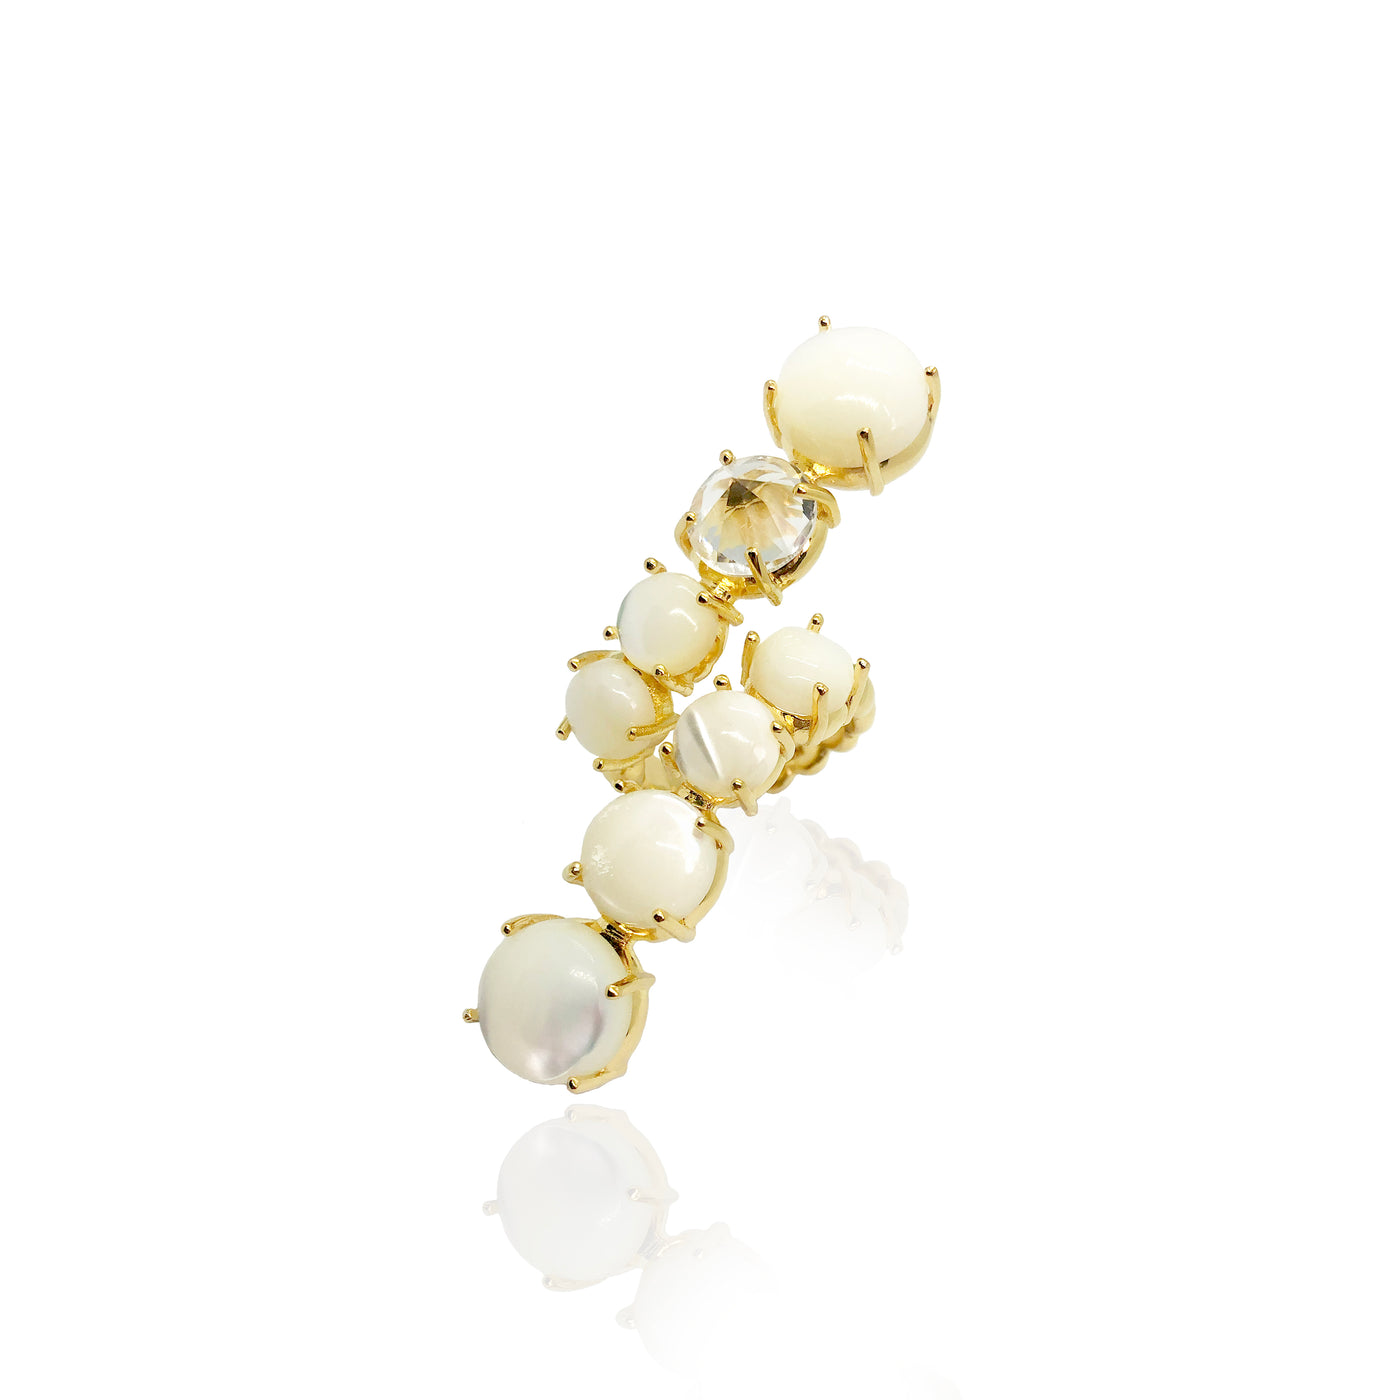 fine jewelry cocktail ring in gold with mother of pearl and white topaz gemstones from Atelier ORMAN